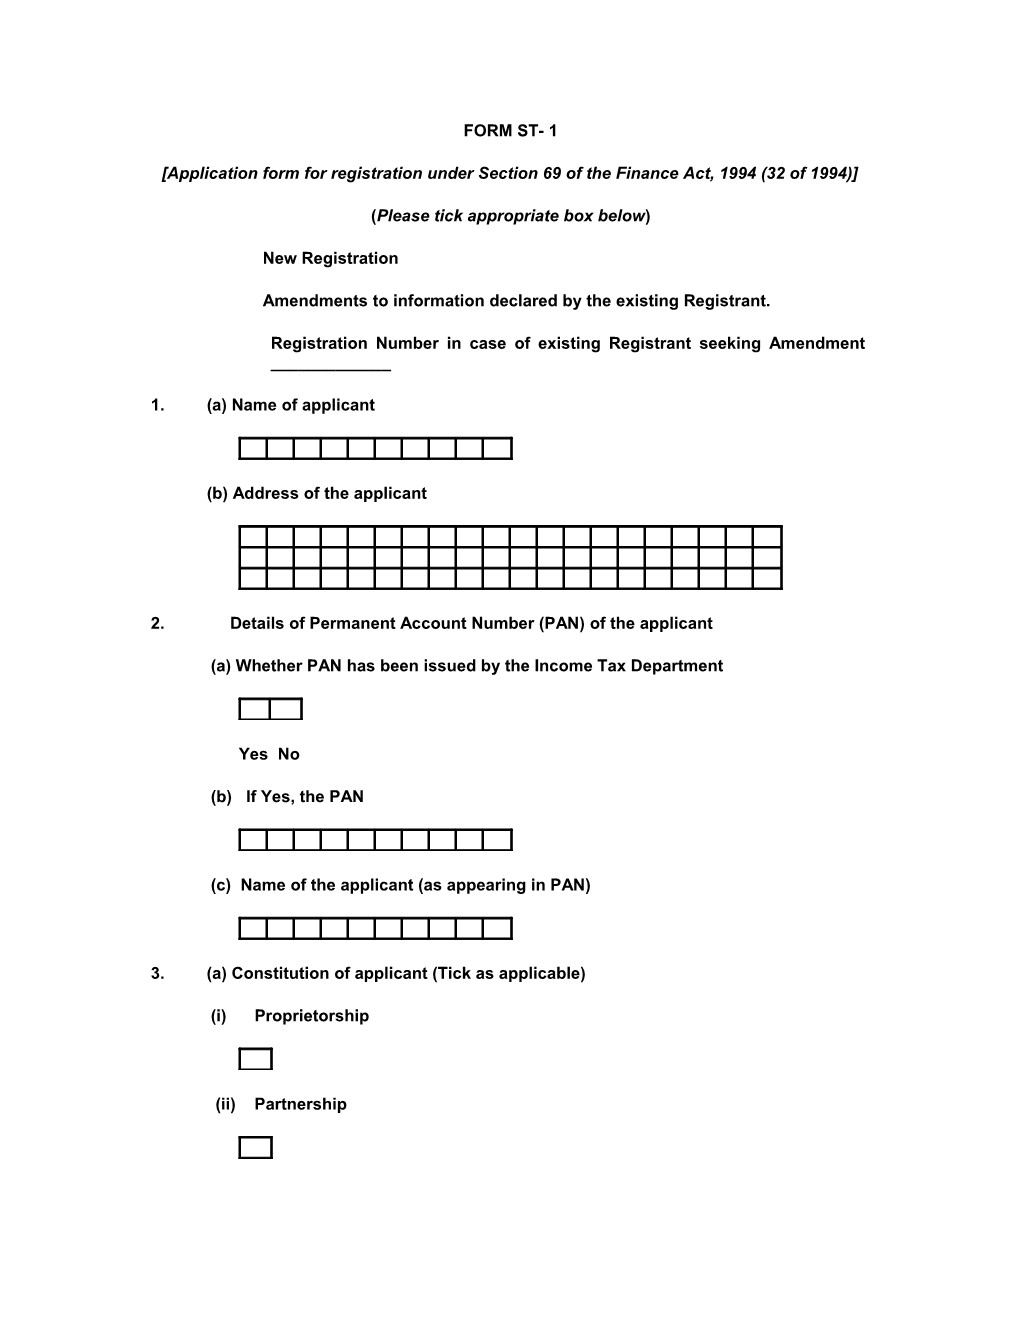 Application Form for Registration Under Section 69 of the Finance Act, 1994 (32 of 1994)